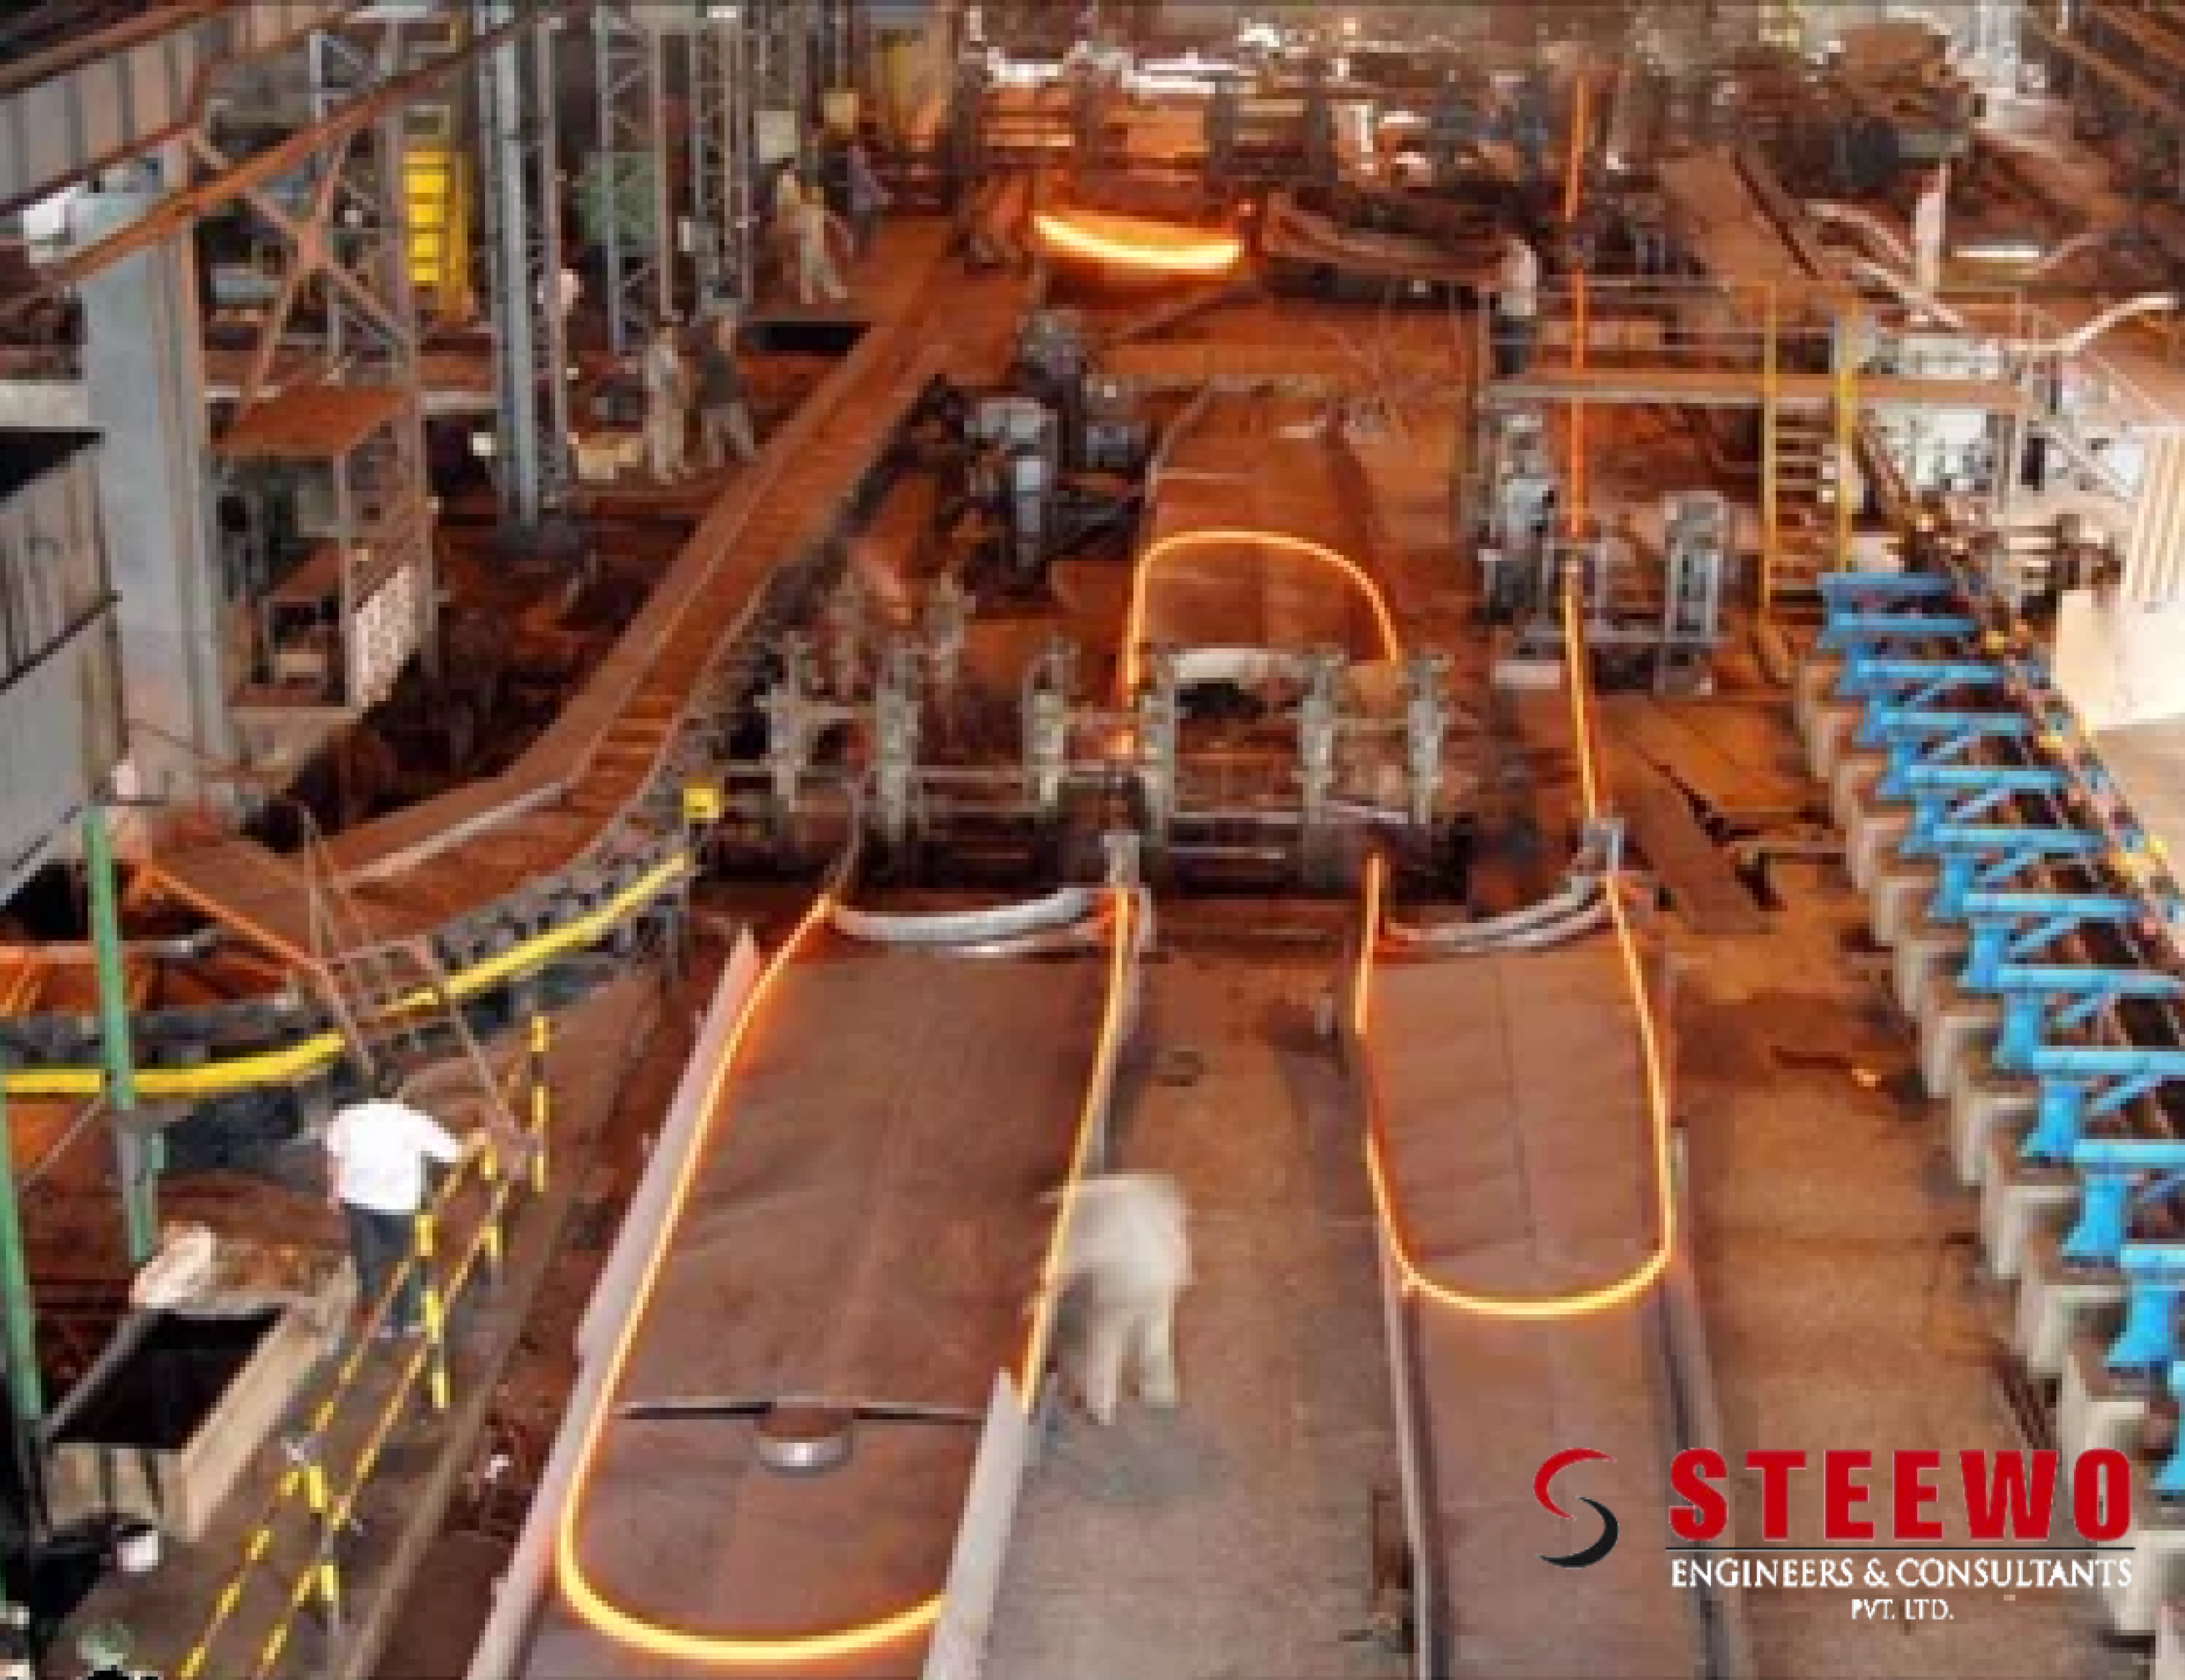  Alloy Steel Rolling Mill Manufacturing & Suppliers: Steewo Engineers